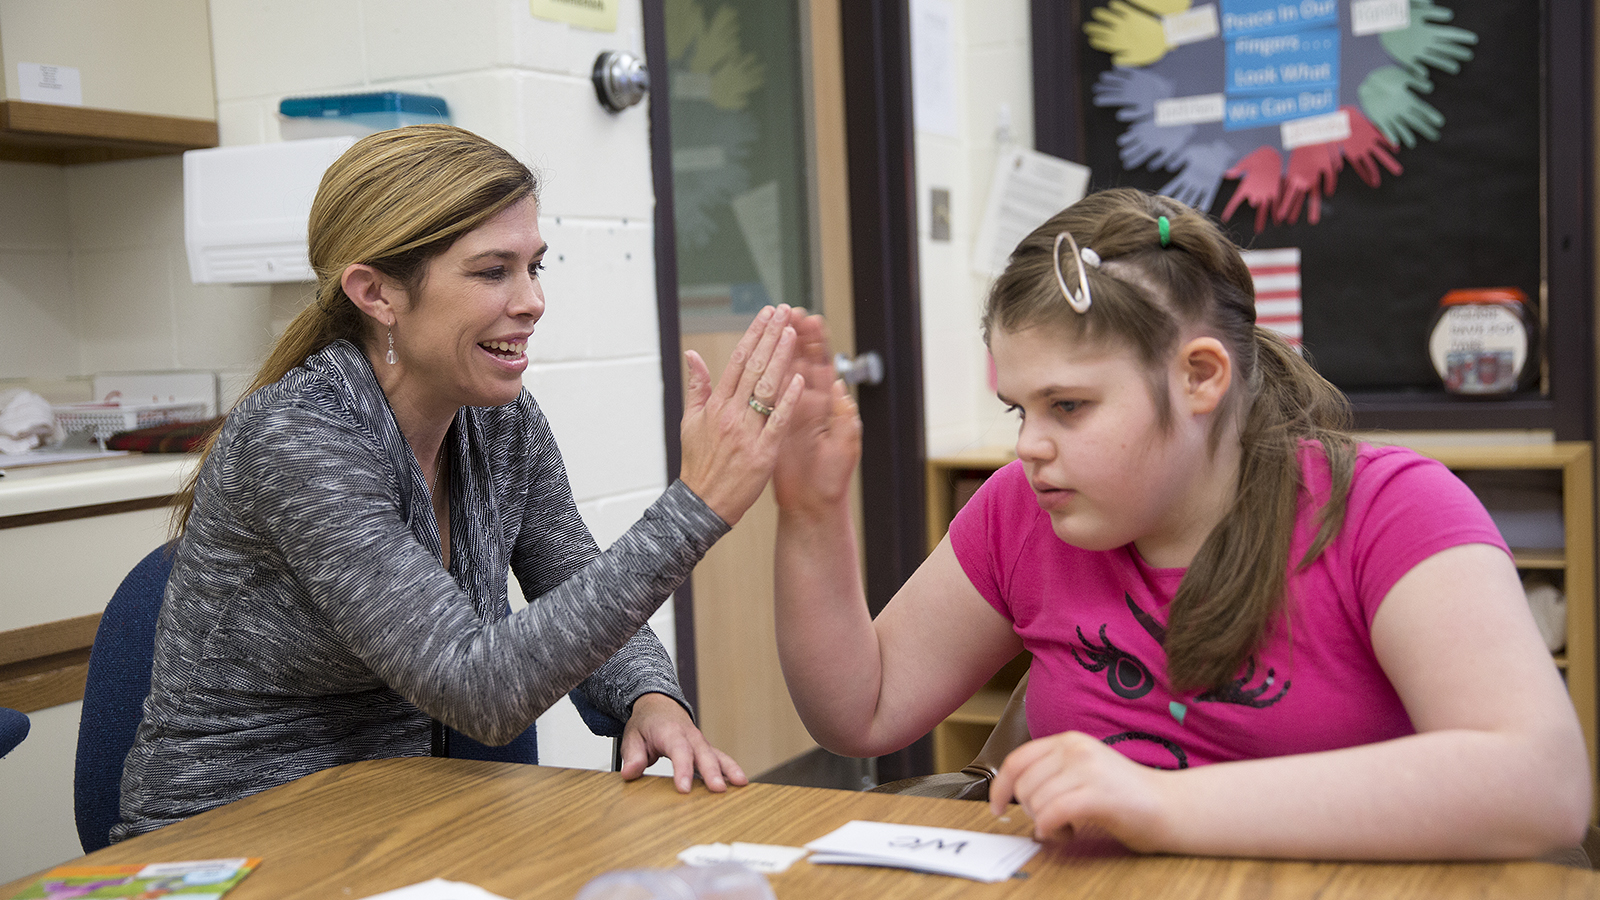 Rachel Zahn (right) gives a high-five to a student at NCECBVI.